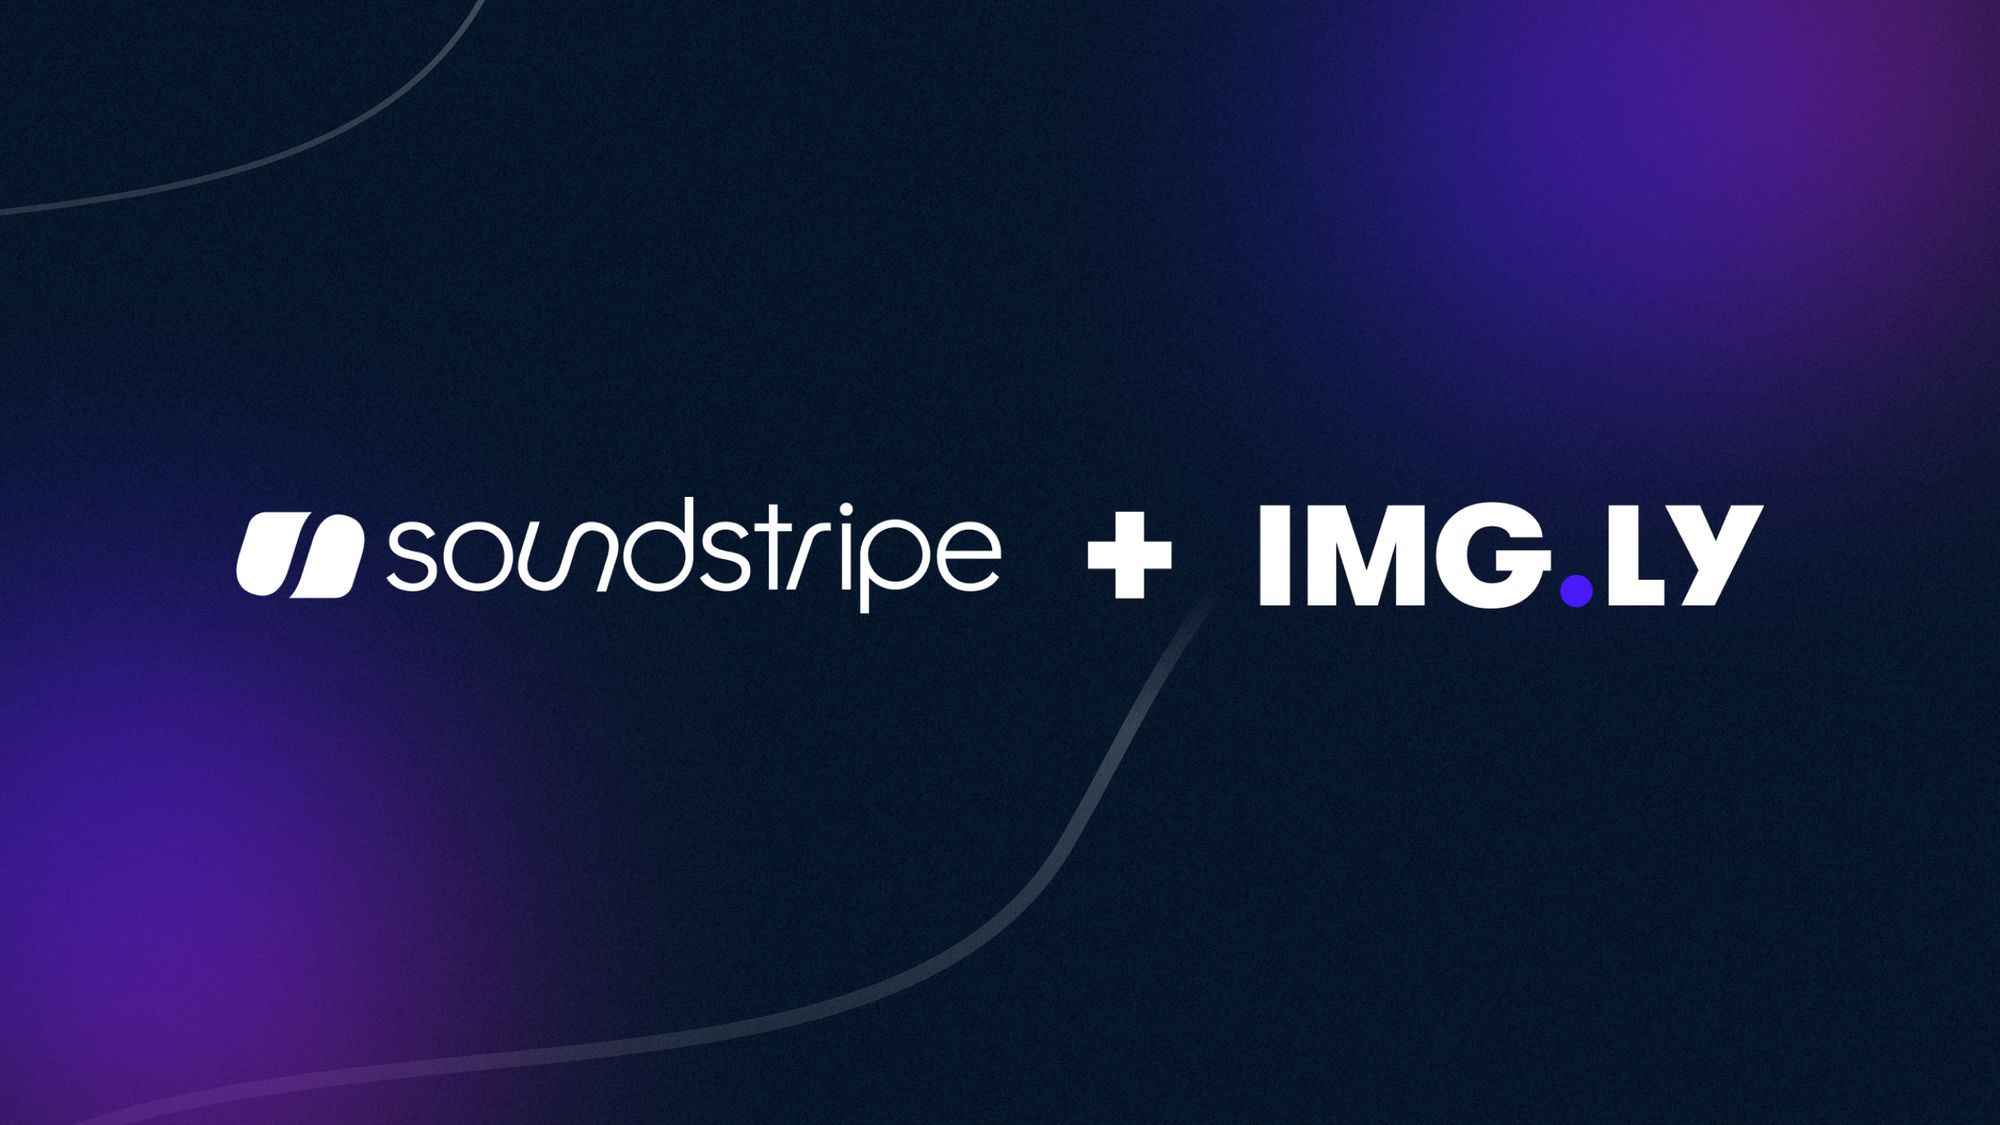 IMG.LY Partners with Soundstripe to Infuse Video Editing with Epic Royalty-Free Music & SFX